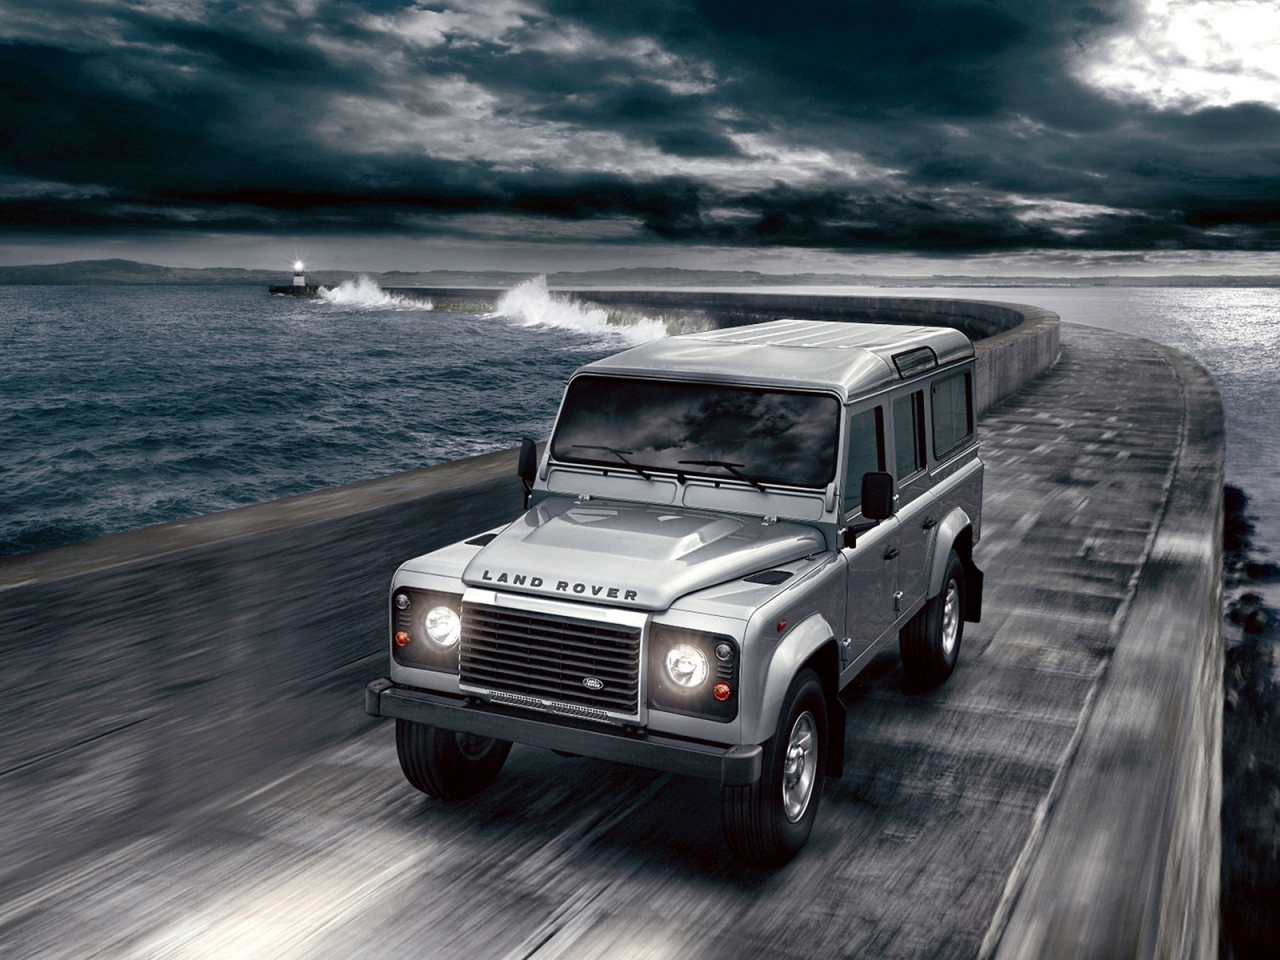 2012 Land Rover Defender for 1280 x 960 resolution